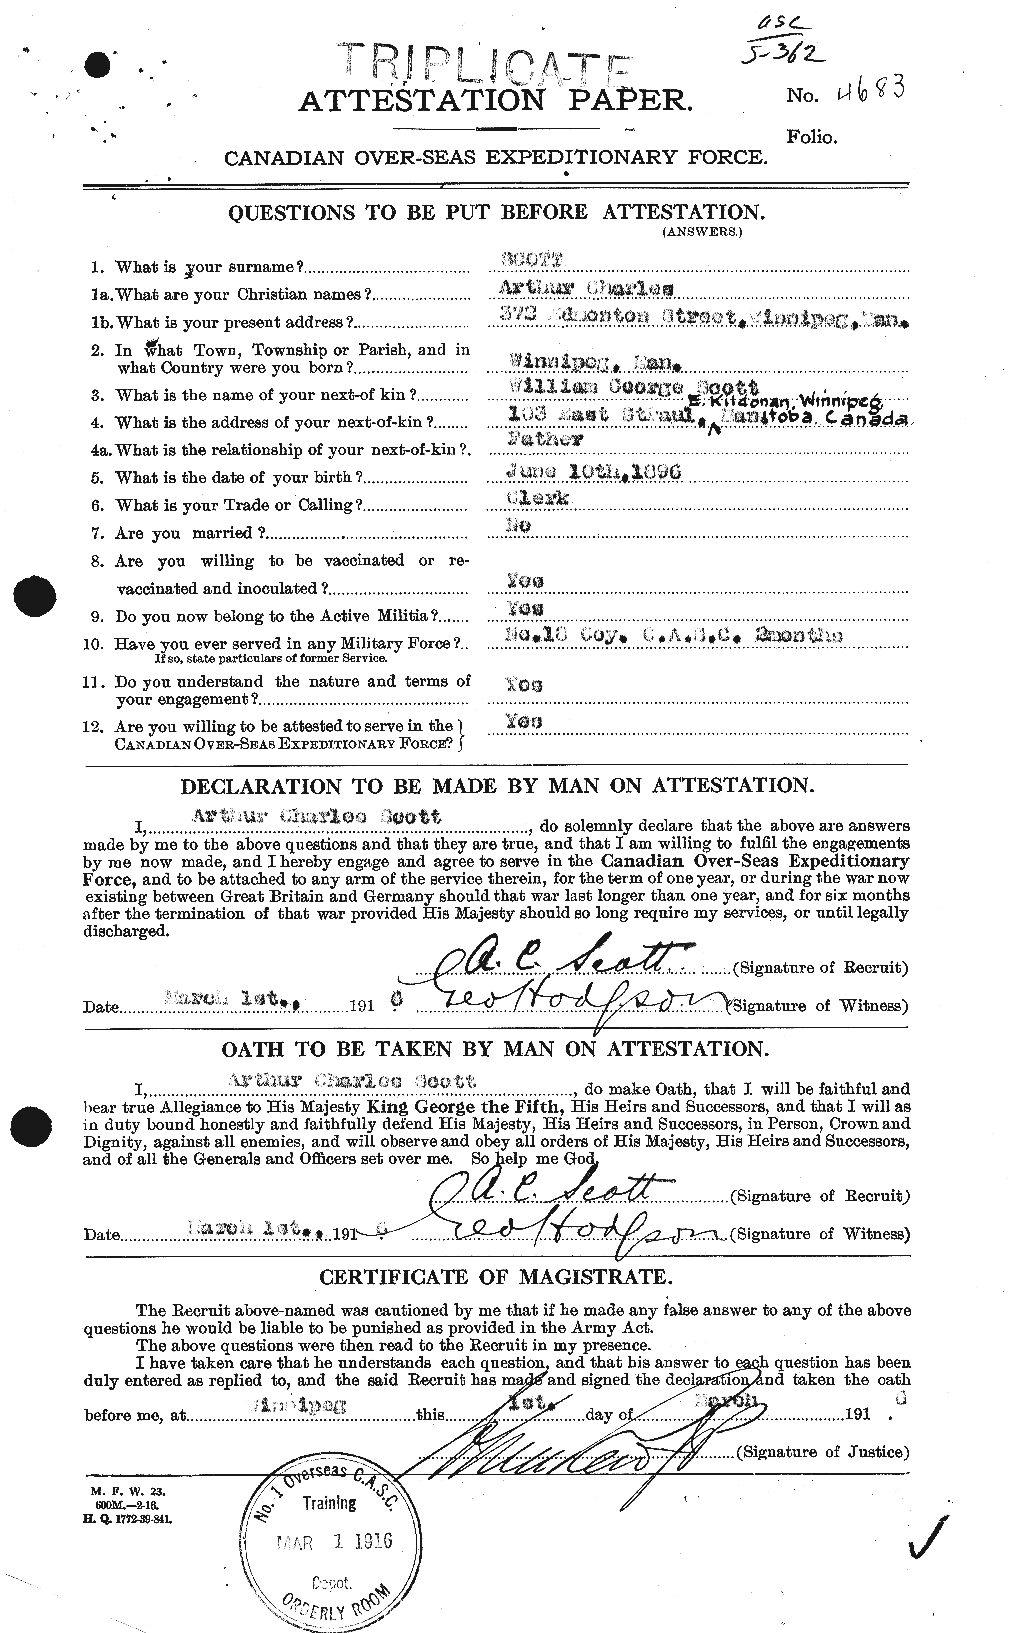 Personnel Records of the First World War - CEF 086405a